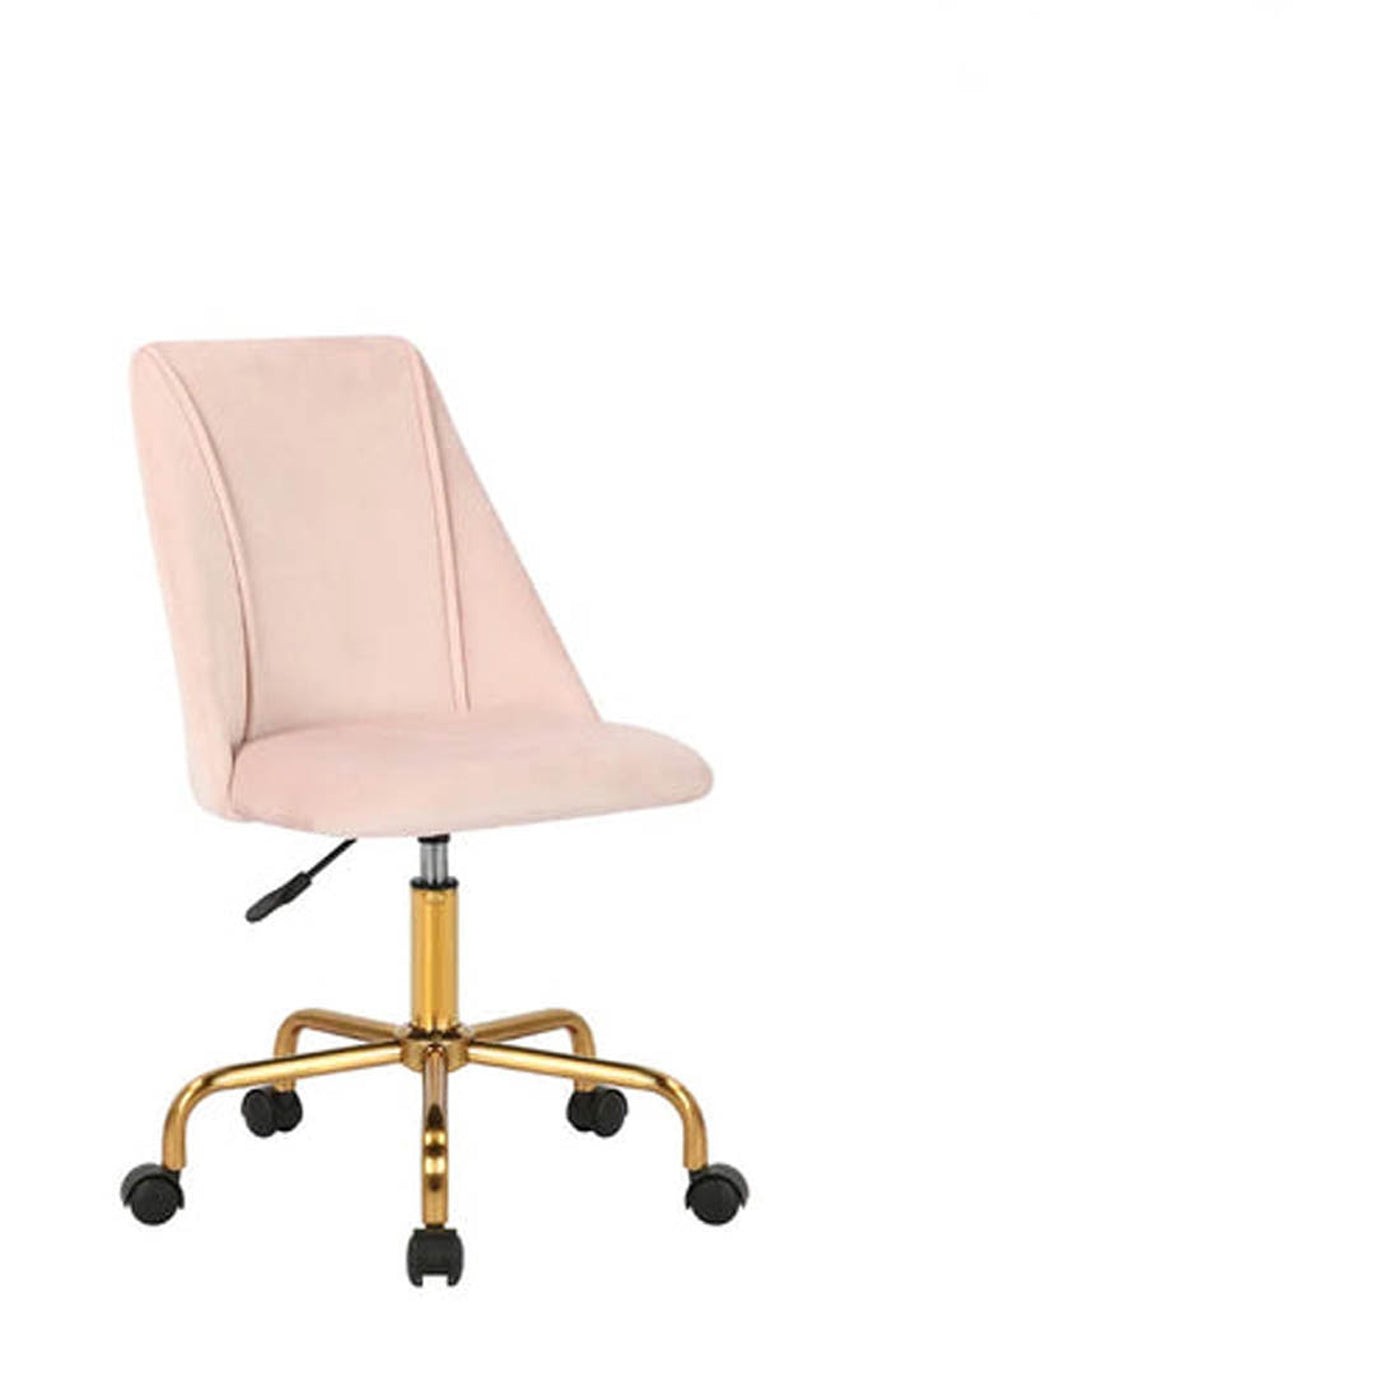 SWIVEL SERENITY BABY PINK UPHOLSTERED CHAIR